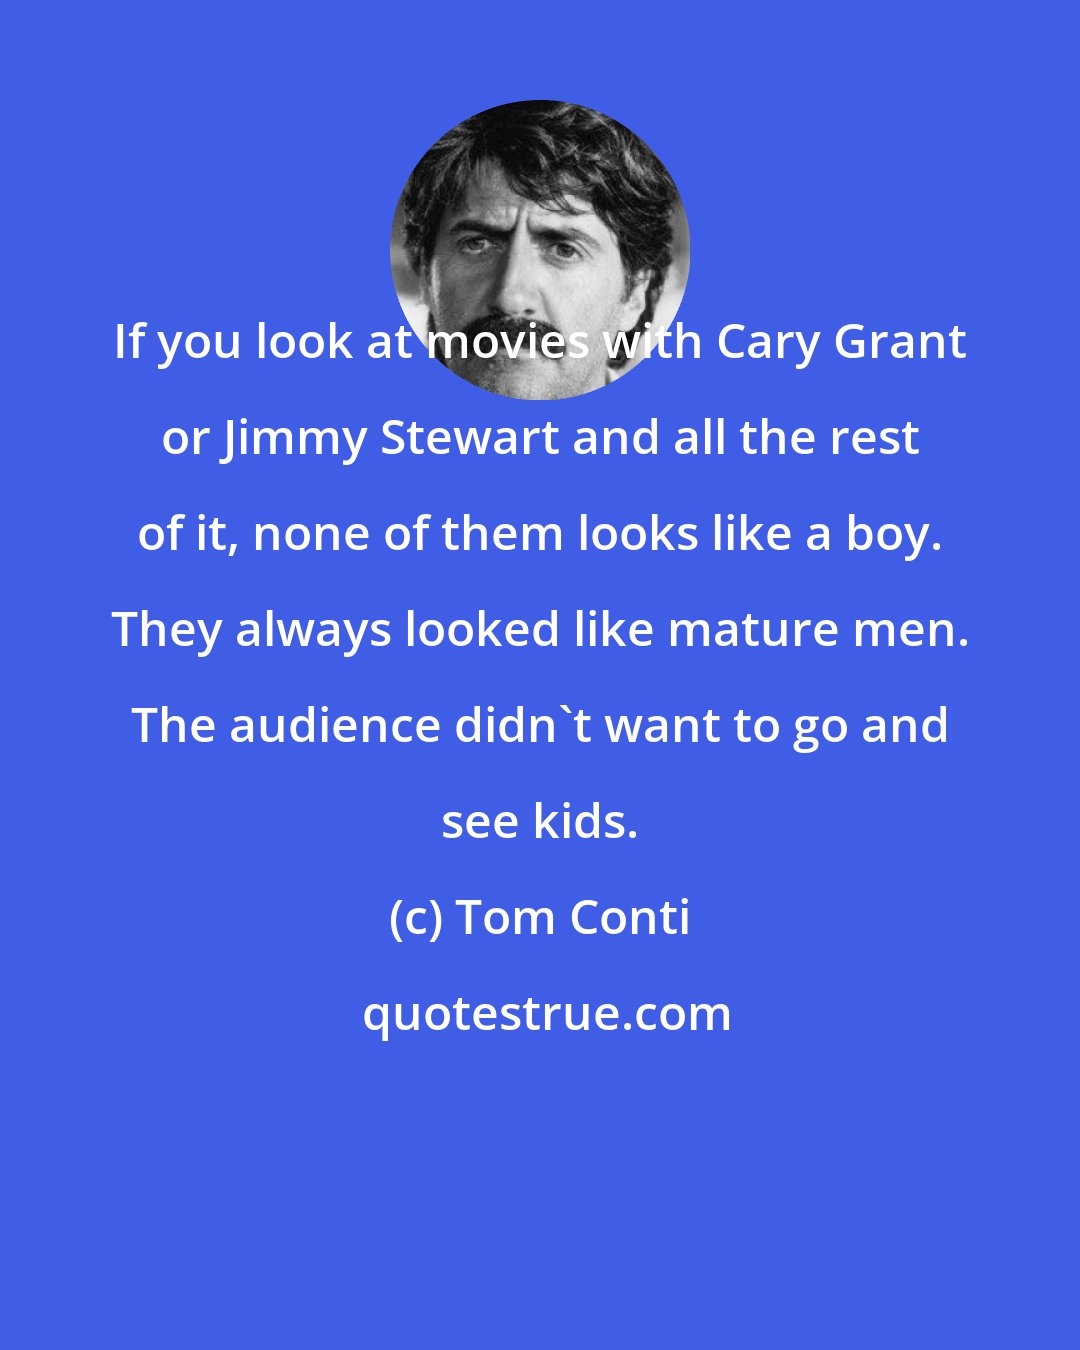 Tom Conti: If you look at movies with Cary Grant or Jimmy Stewart and all the rest of it, none of them looks like a boy. They always looked like mature men. The audience didn't want to go and see kids.